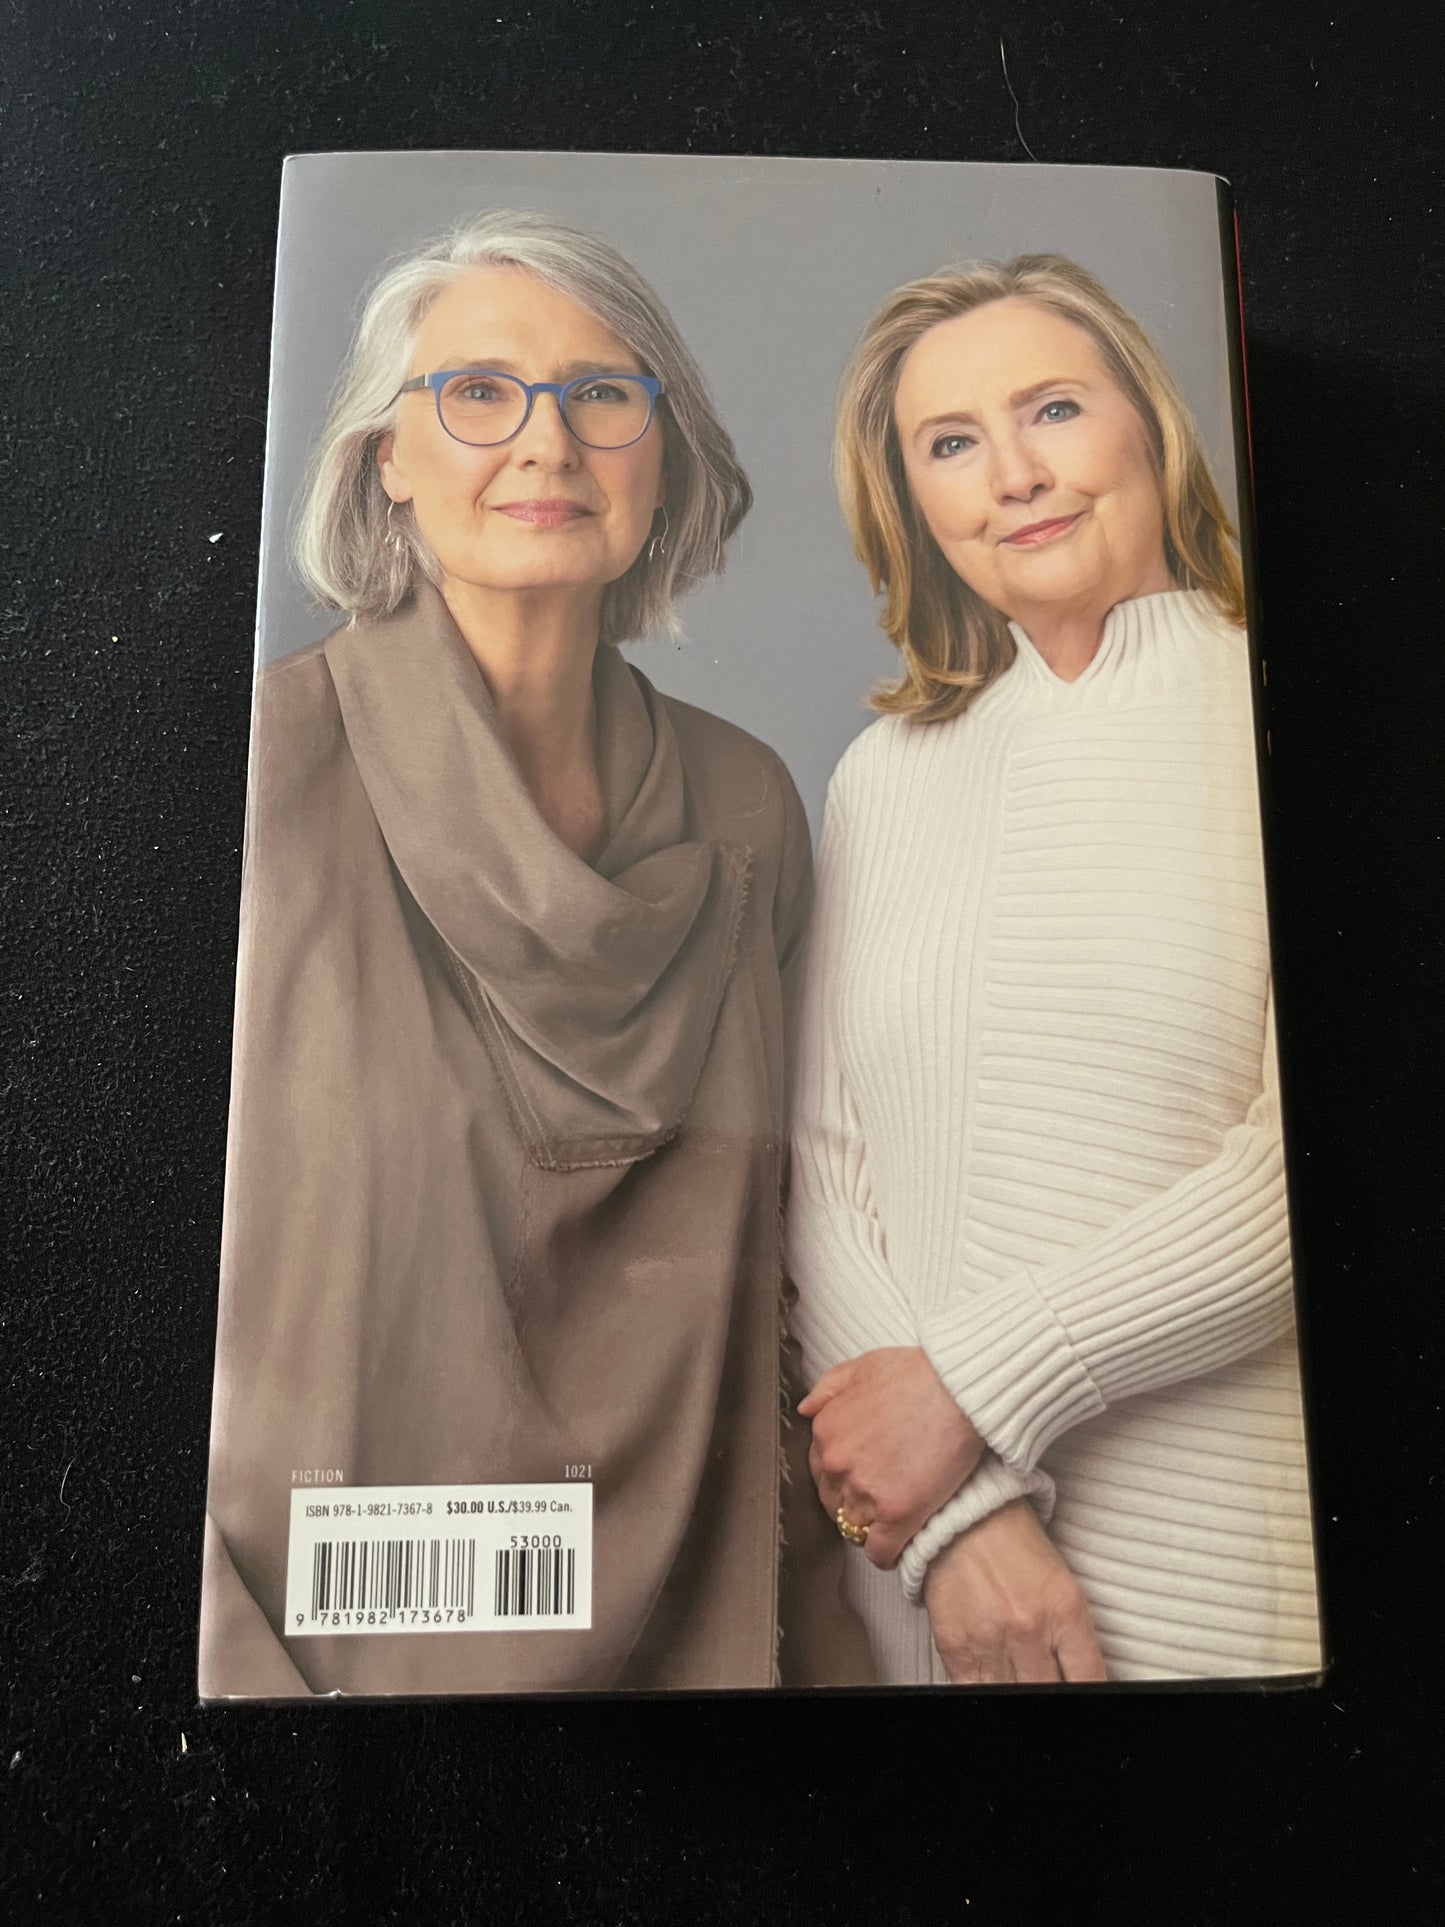 STATE OF TERROR by Hillary Rodham Clinton and Louise Penny